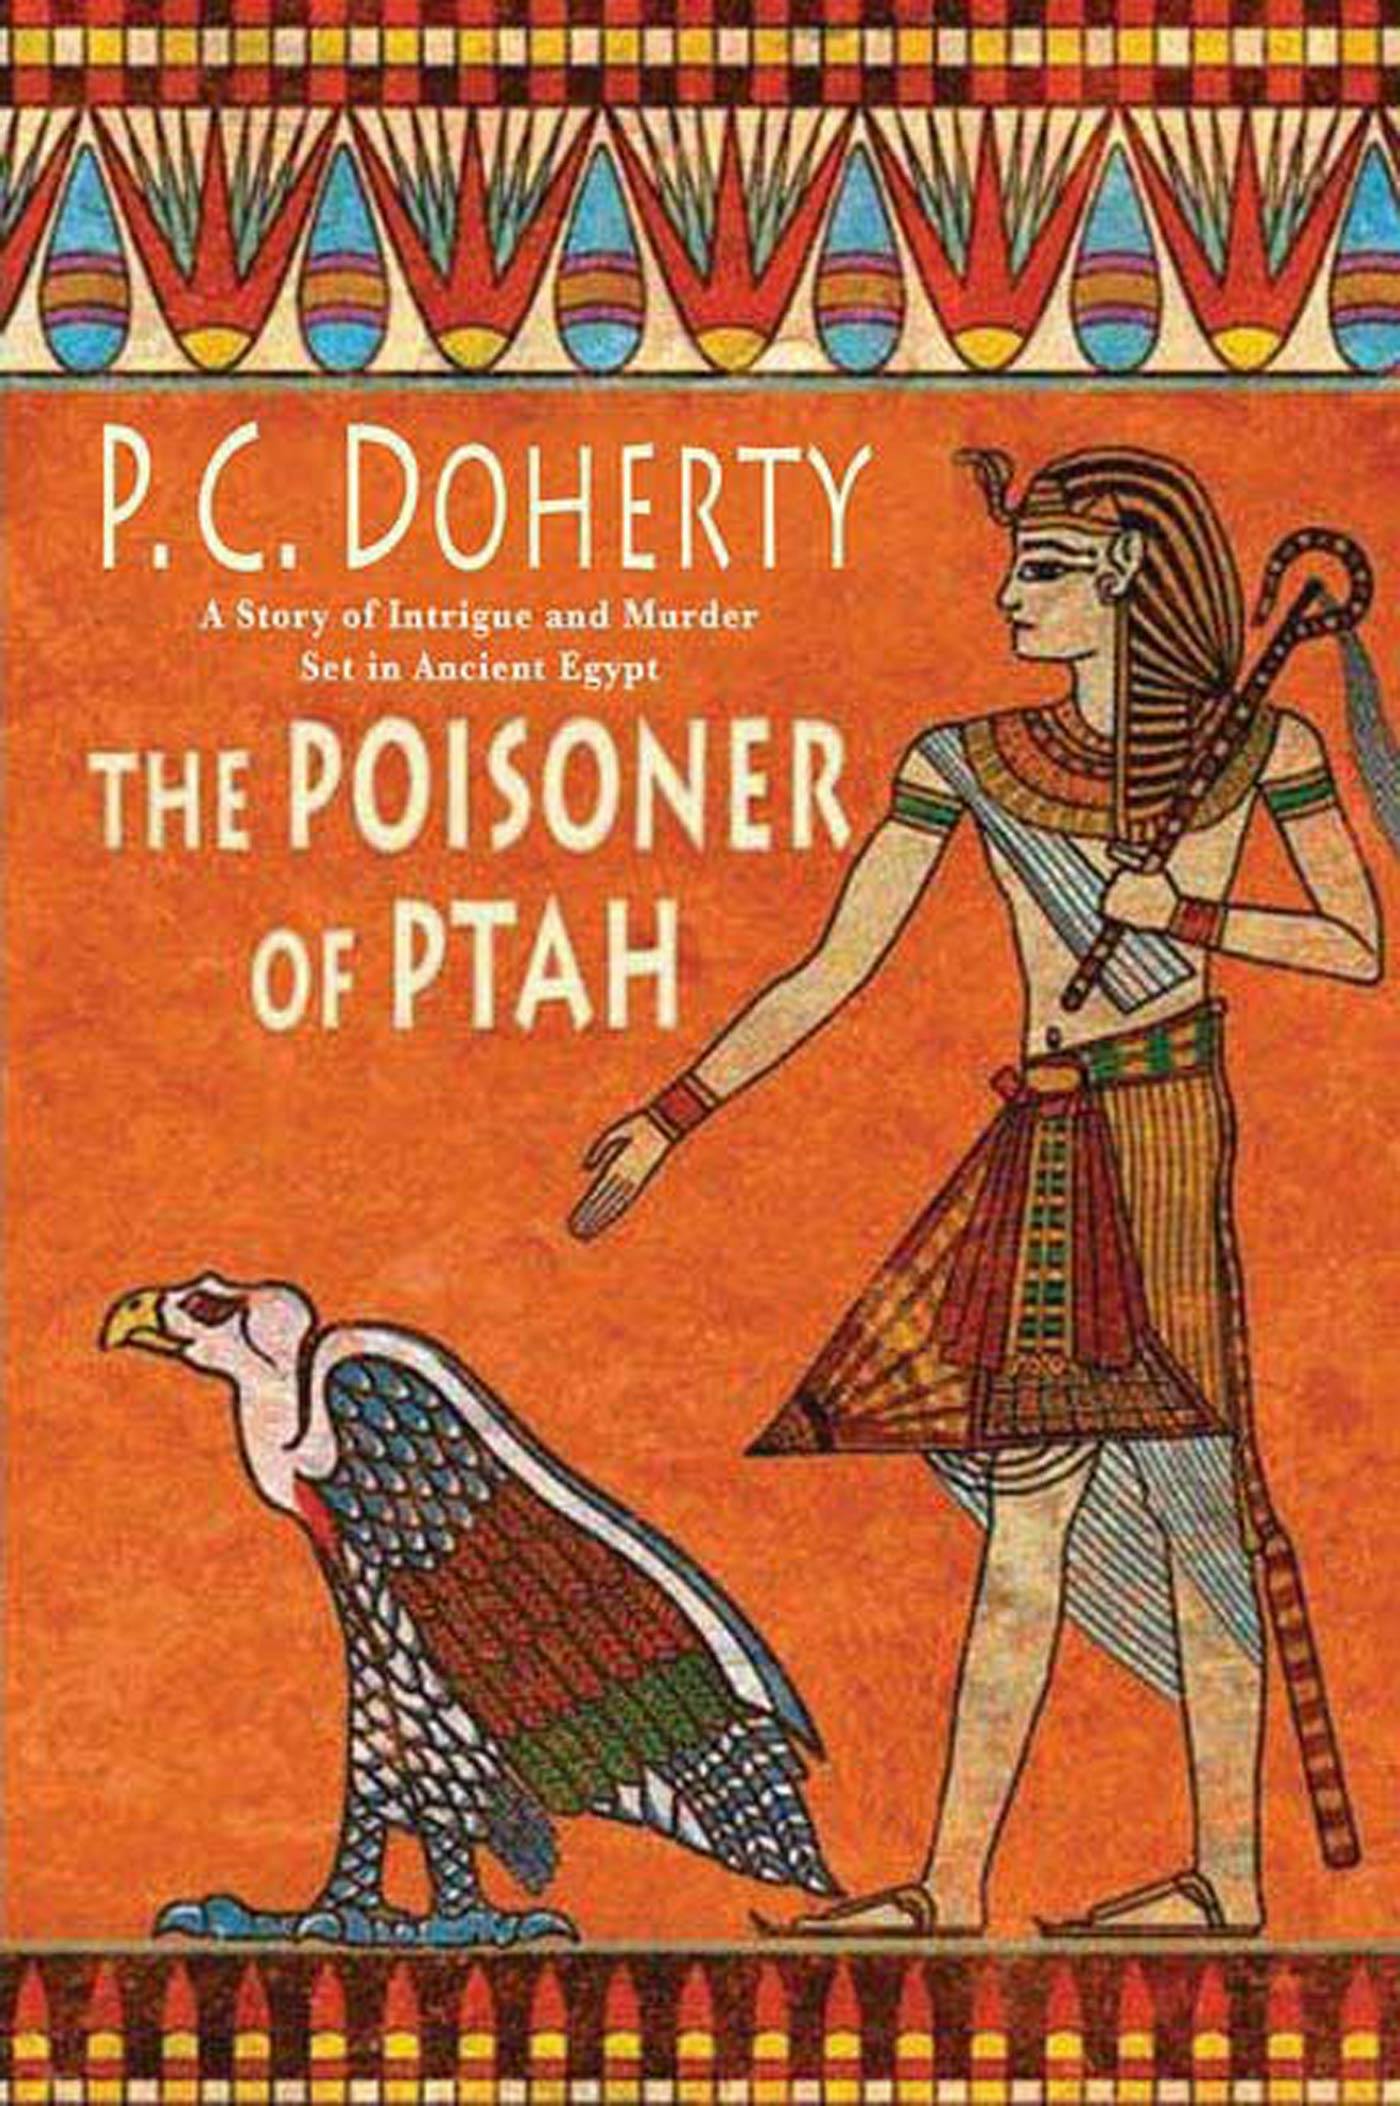 Image of The Poisoner of Ptah